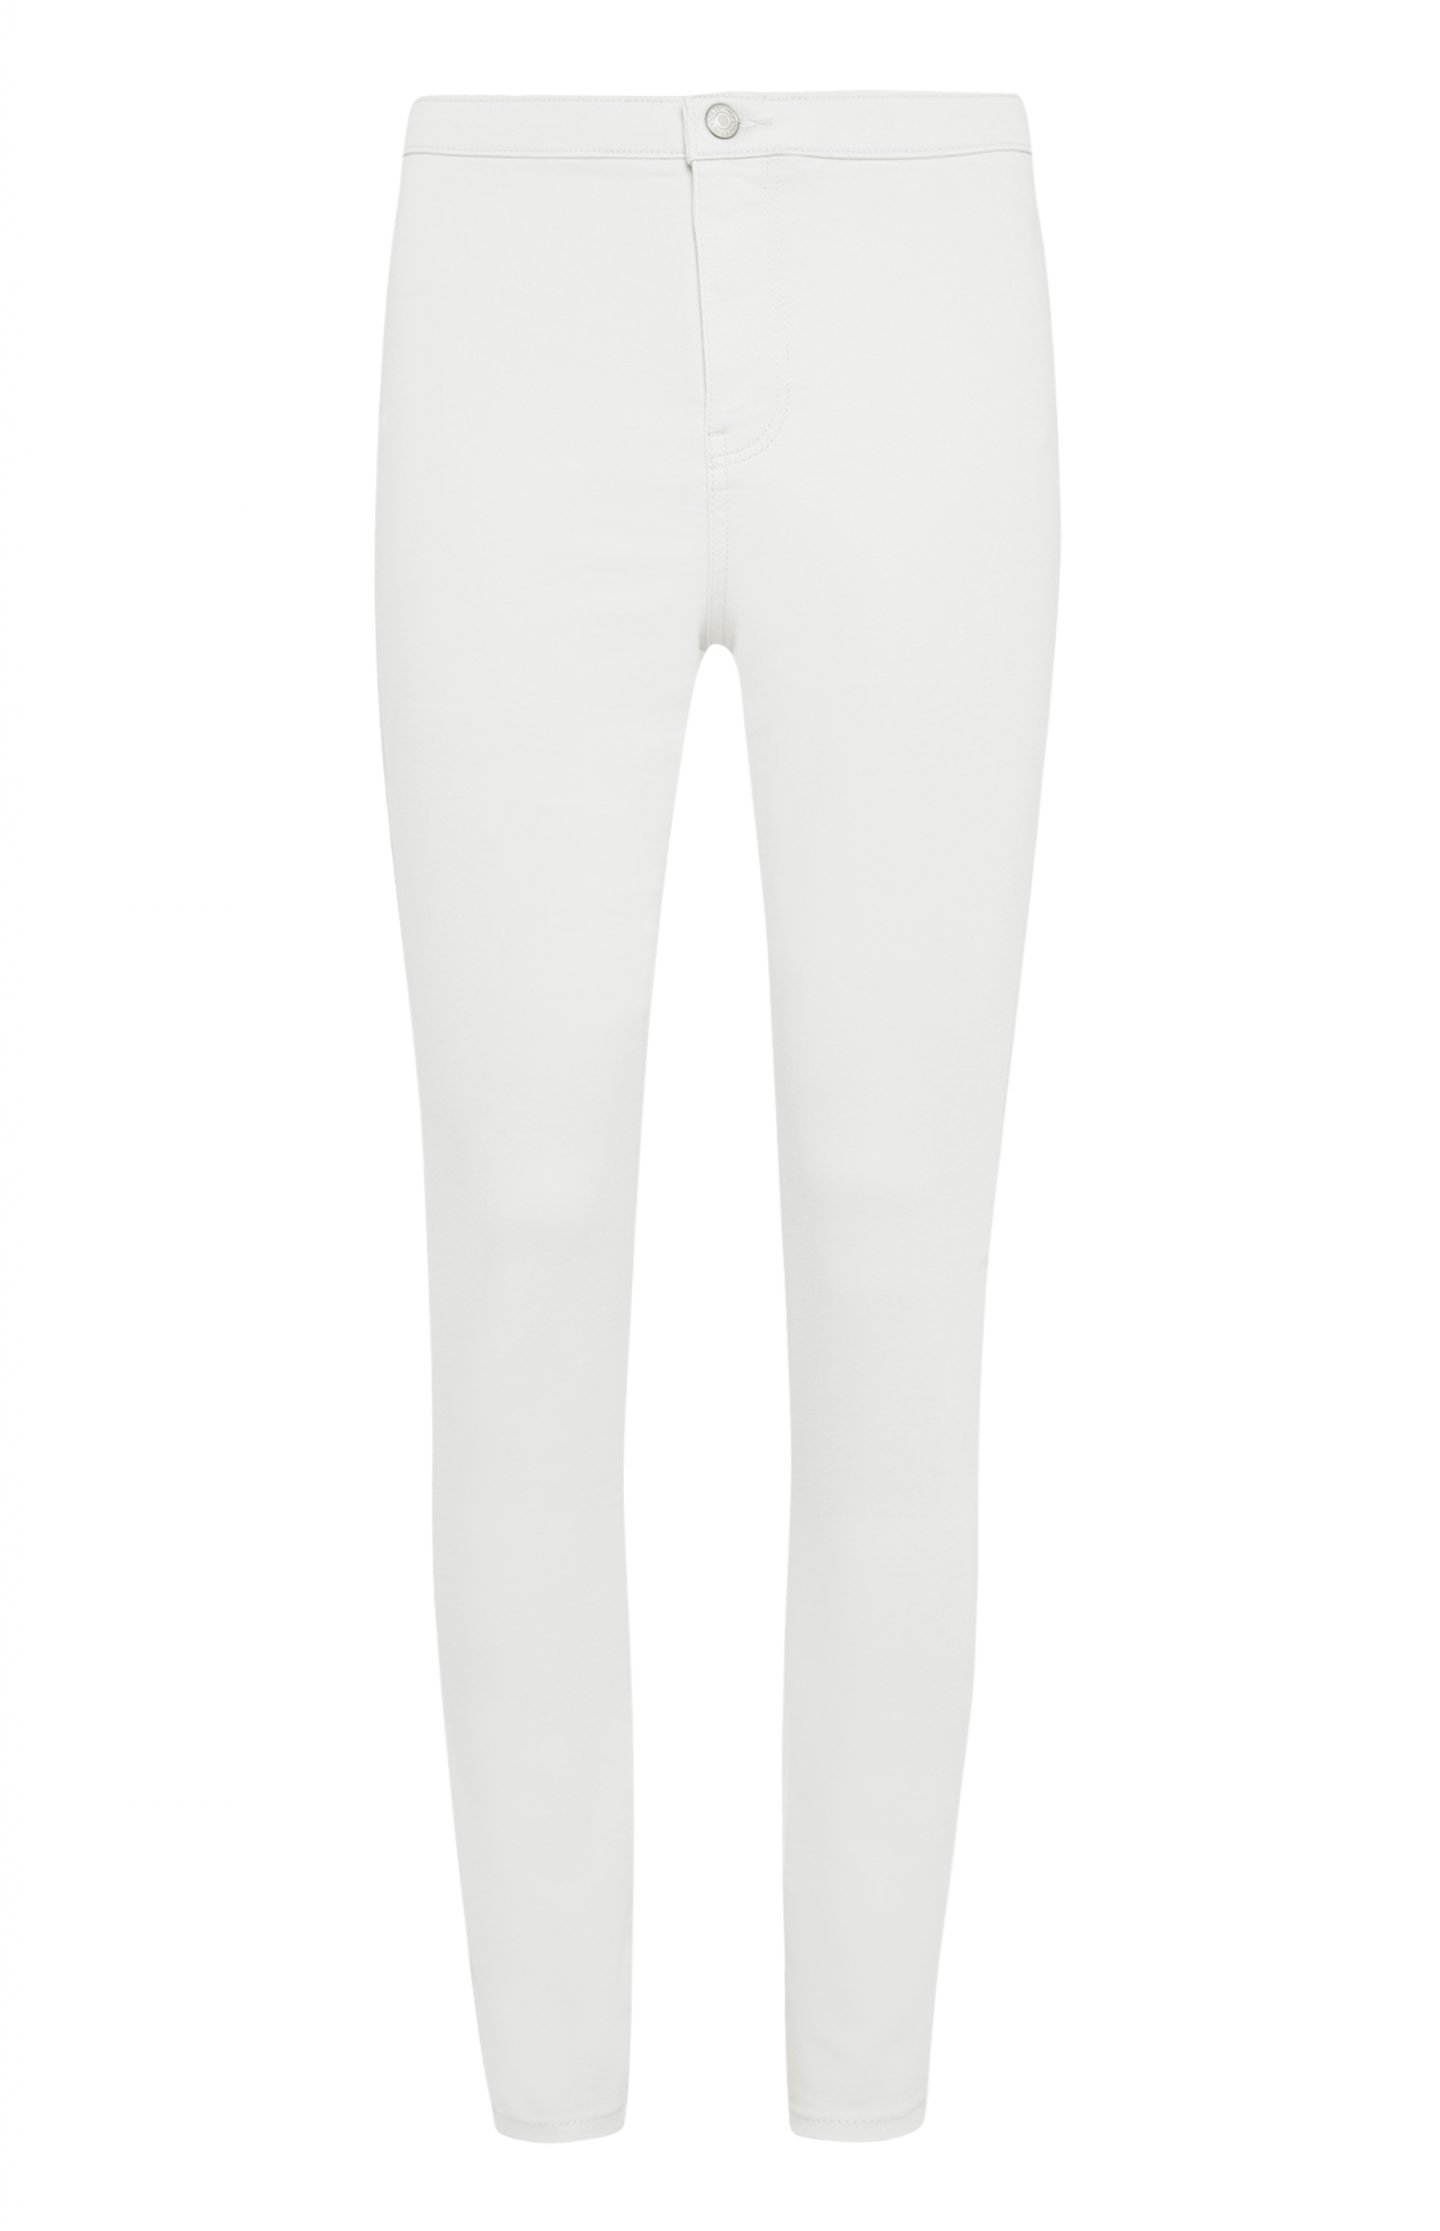 Penneys white jeans